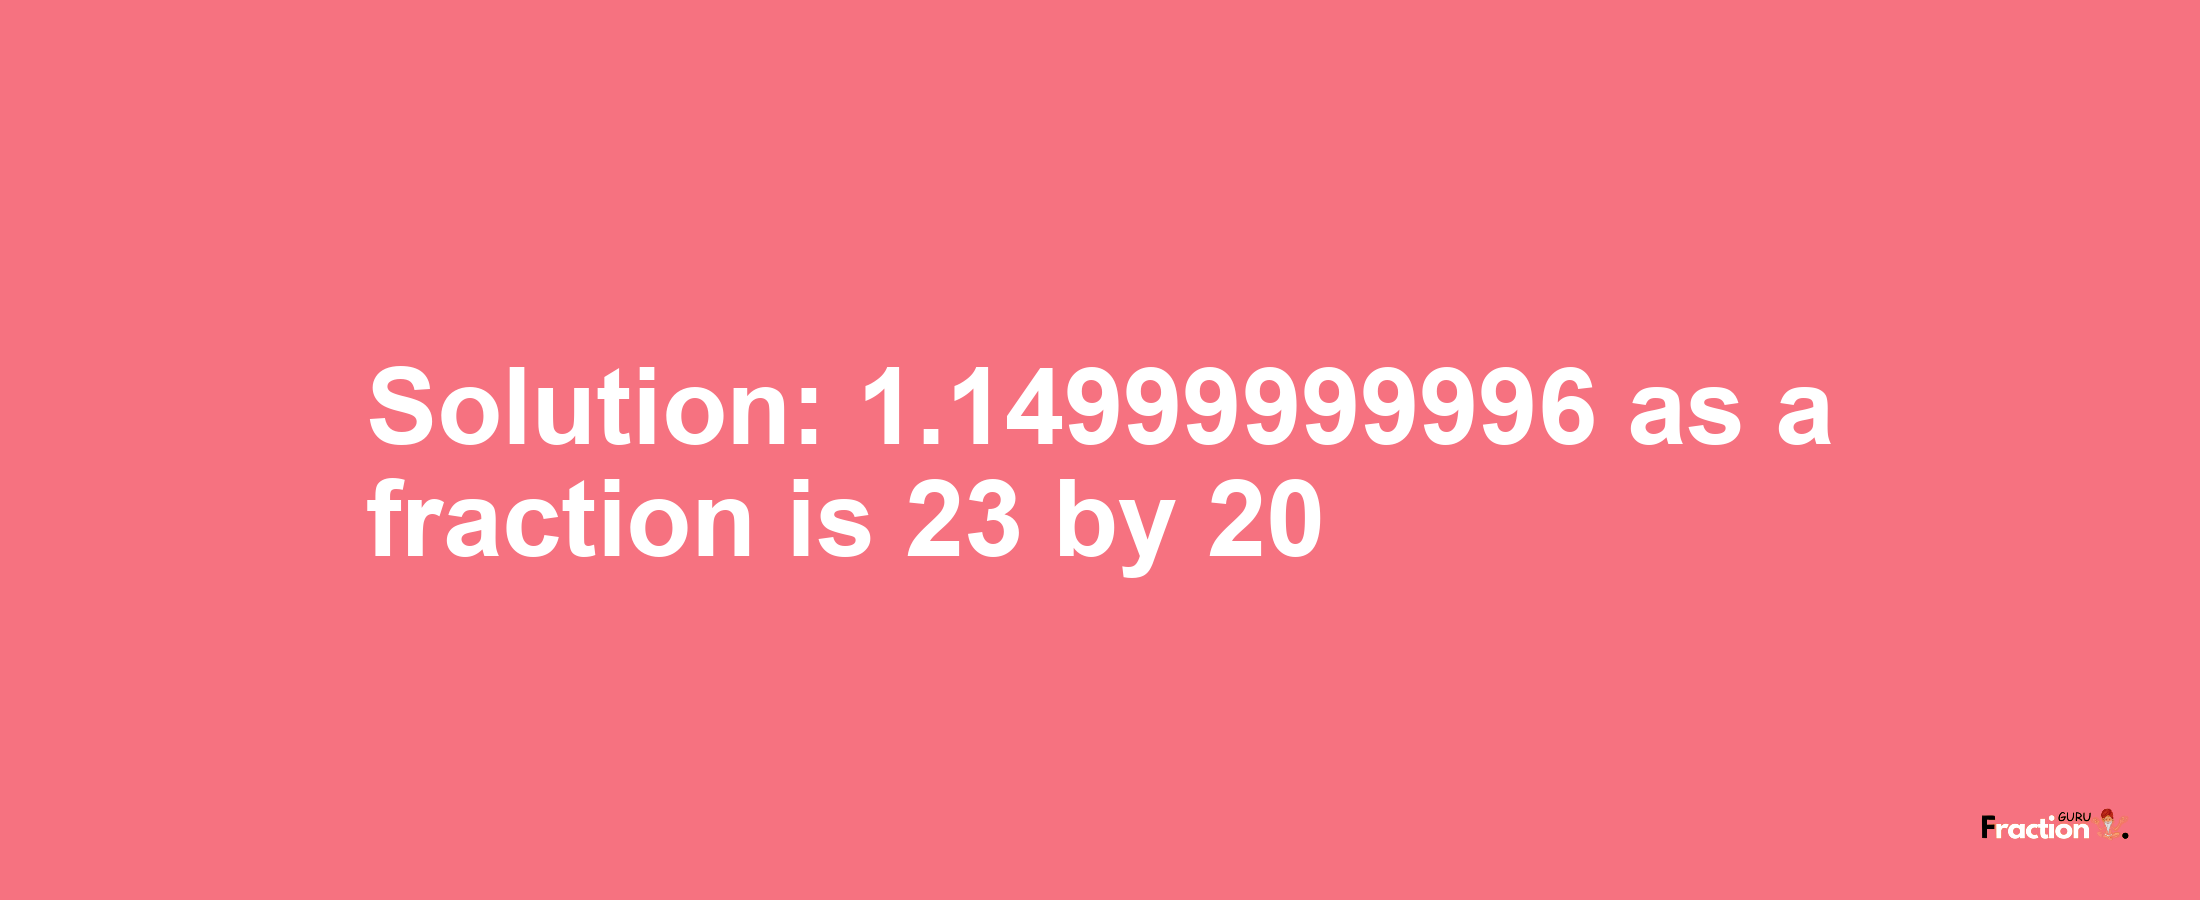 Solution:1.14999999996 as a fraction is 23/20